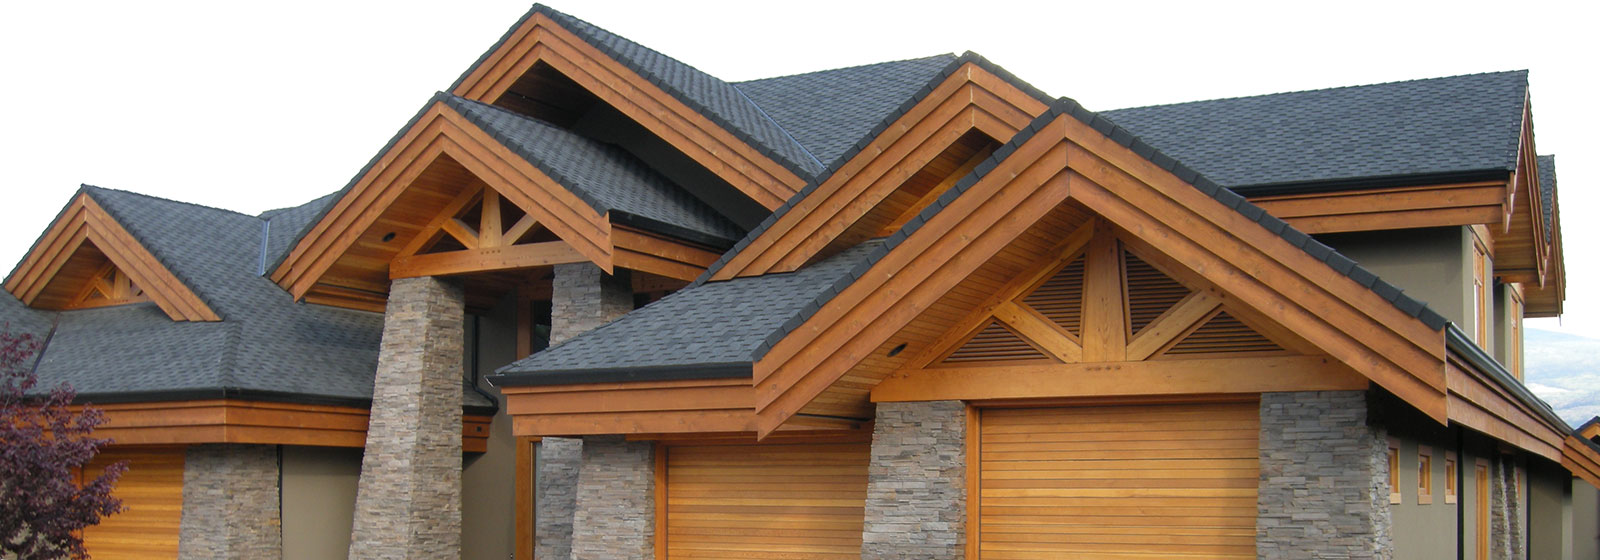 Custom designed timber frame hybrid home by Log and Timber Works British Columbia